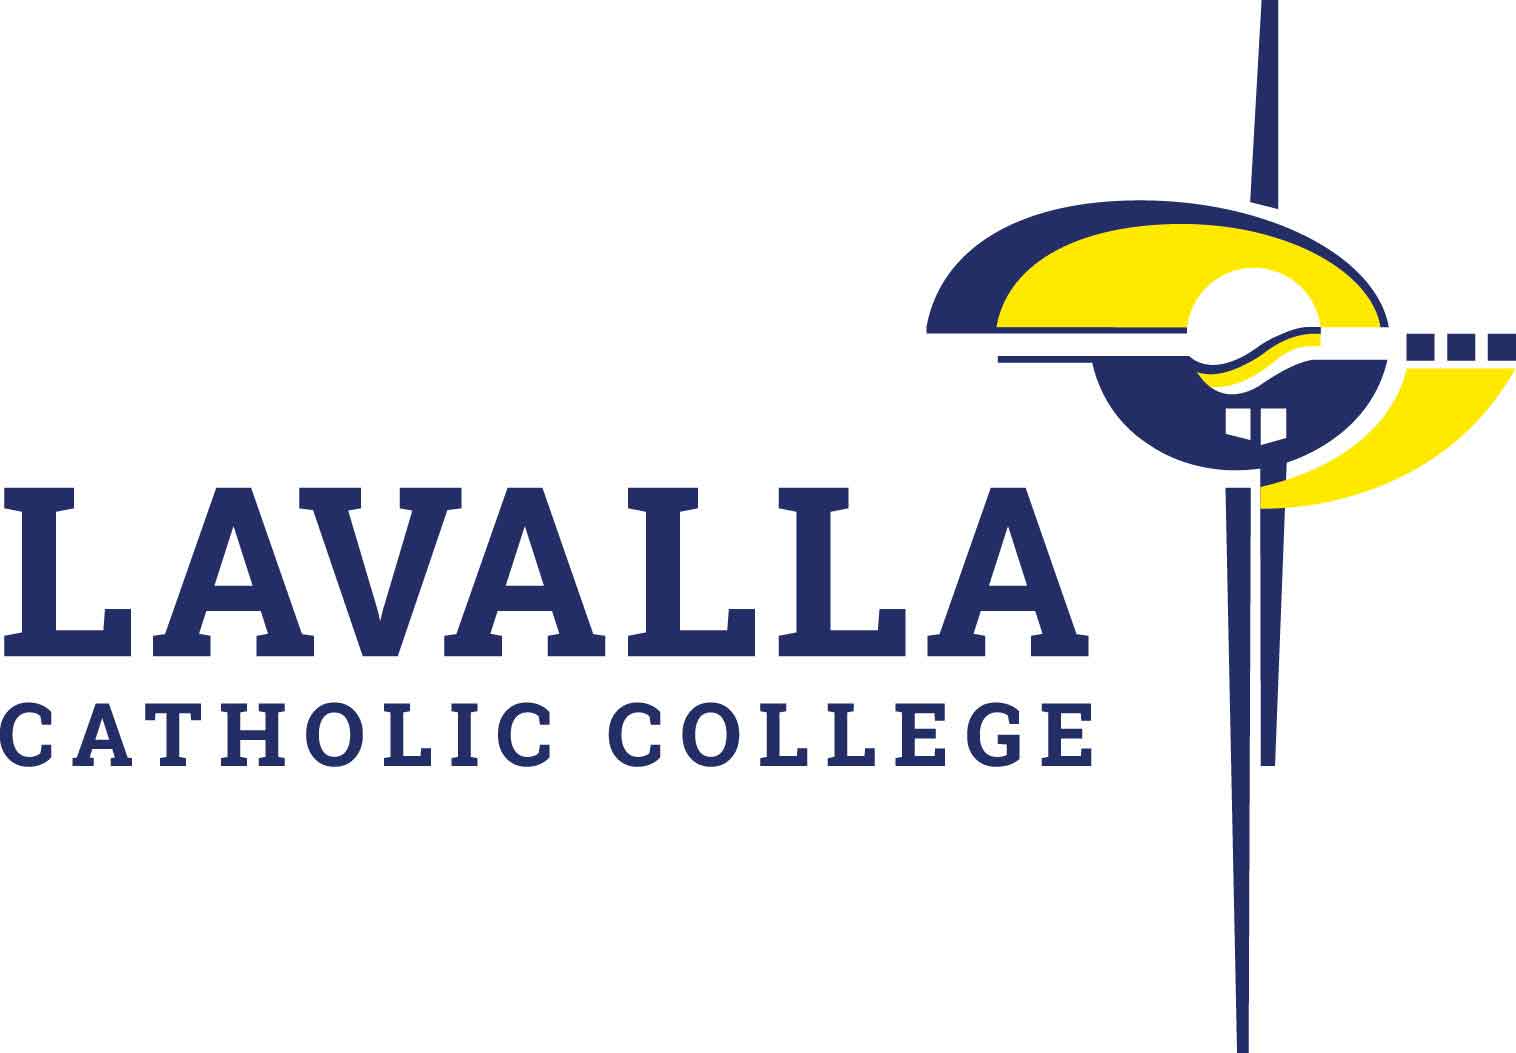 Lavalla Catholic College students have exclusive access to this page, providing them with $25 off the regular advertised course investment amount for each subject offered at the Lavalla Catholic College, Kildare Campus.  Investment to Lavalla Catholic College students is only $44 (Inc. GST) per student per subject, normally valued at $69 (Inc GST).